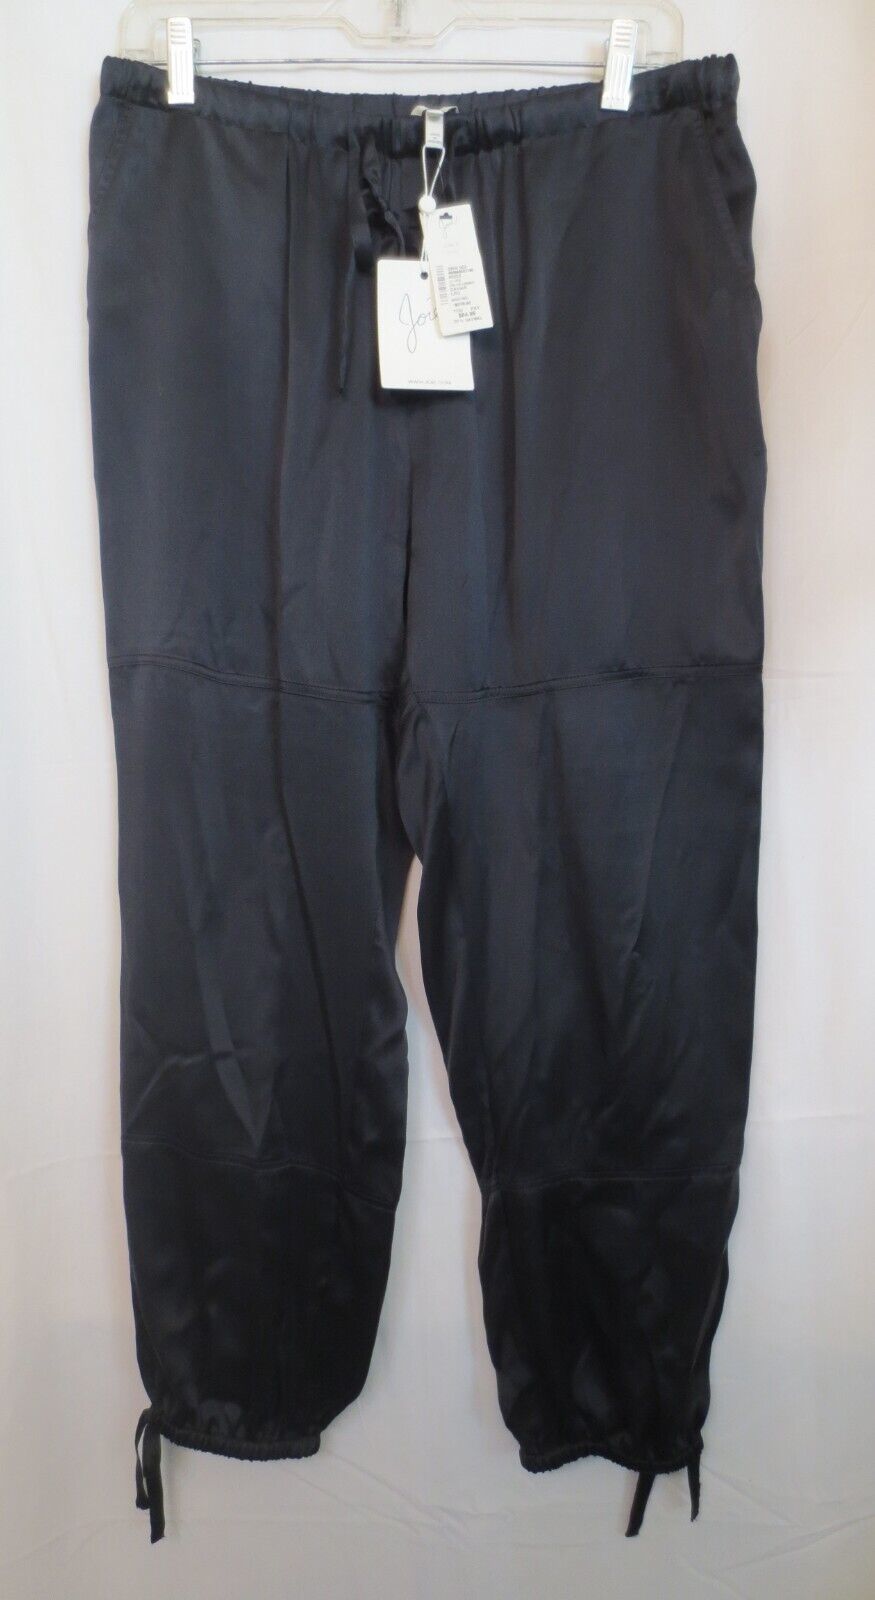 Primary image for NWT Joie Women Black Silk Pants Size L $270.00